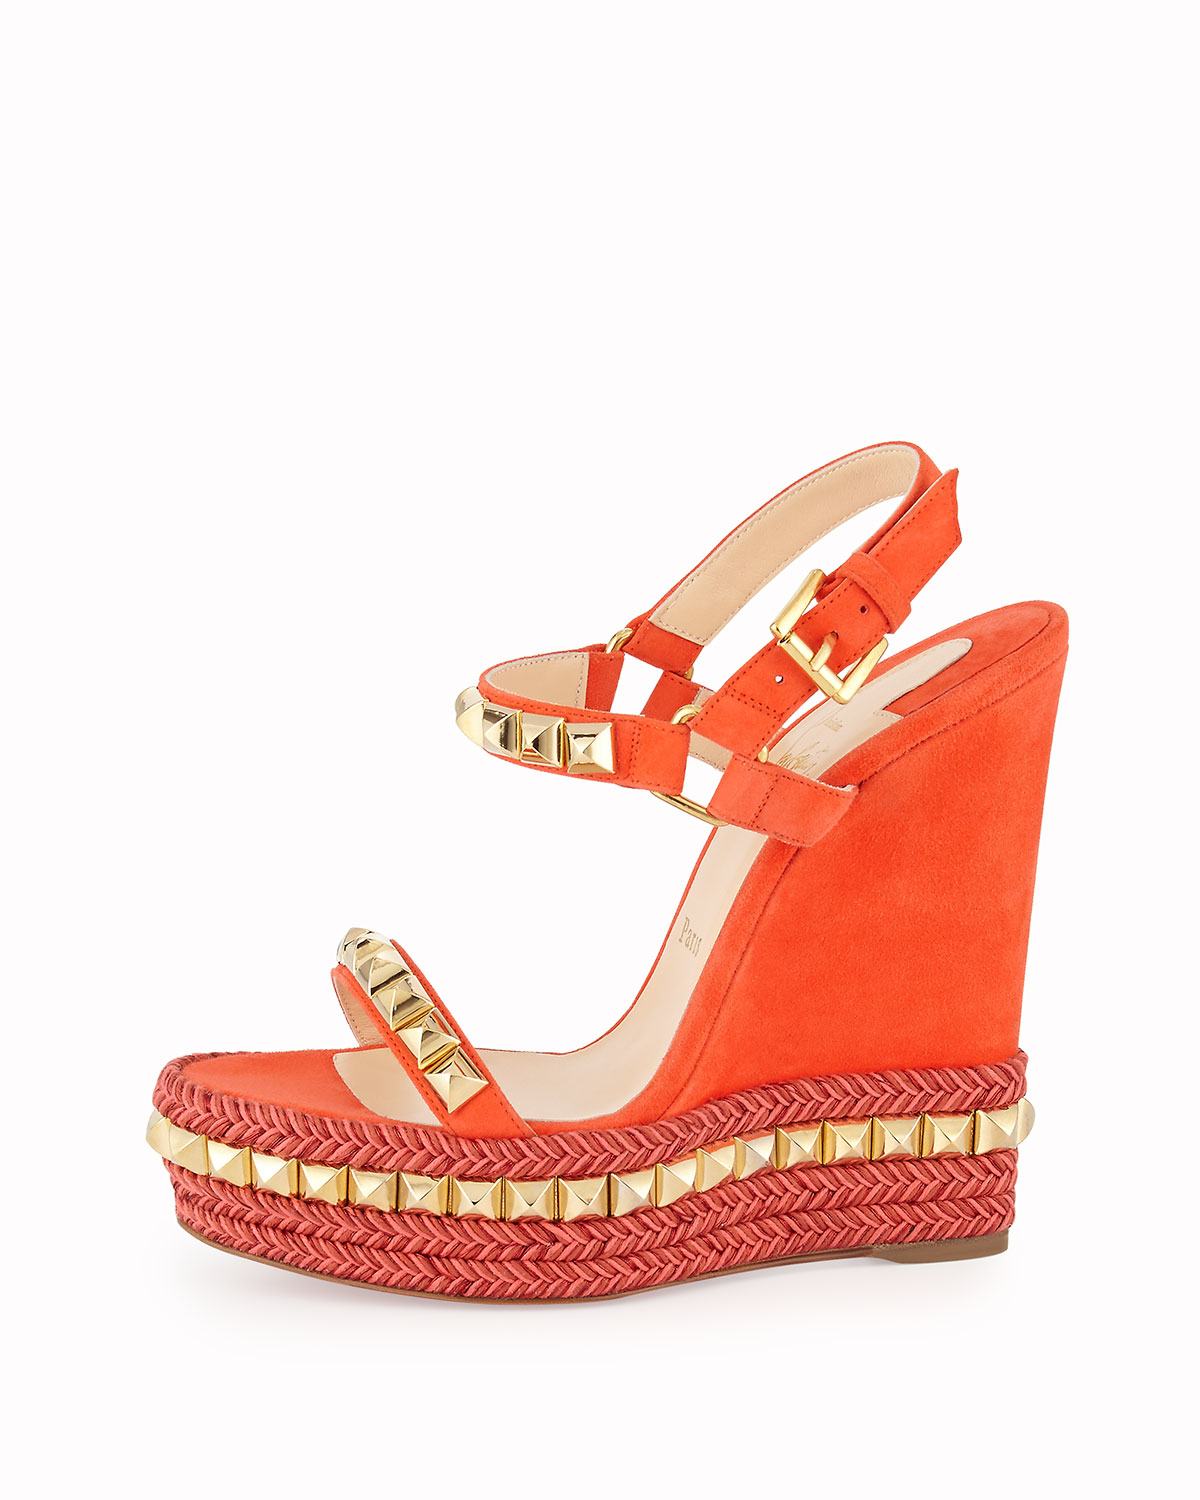 christian louboutins replica - Christian louboutin Cataclou Studded Suede Red Sole Wedge Sandal ...